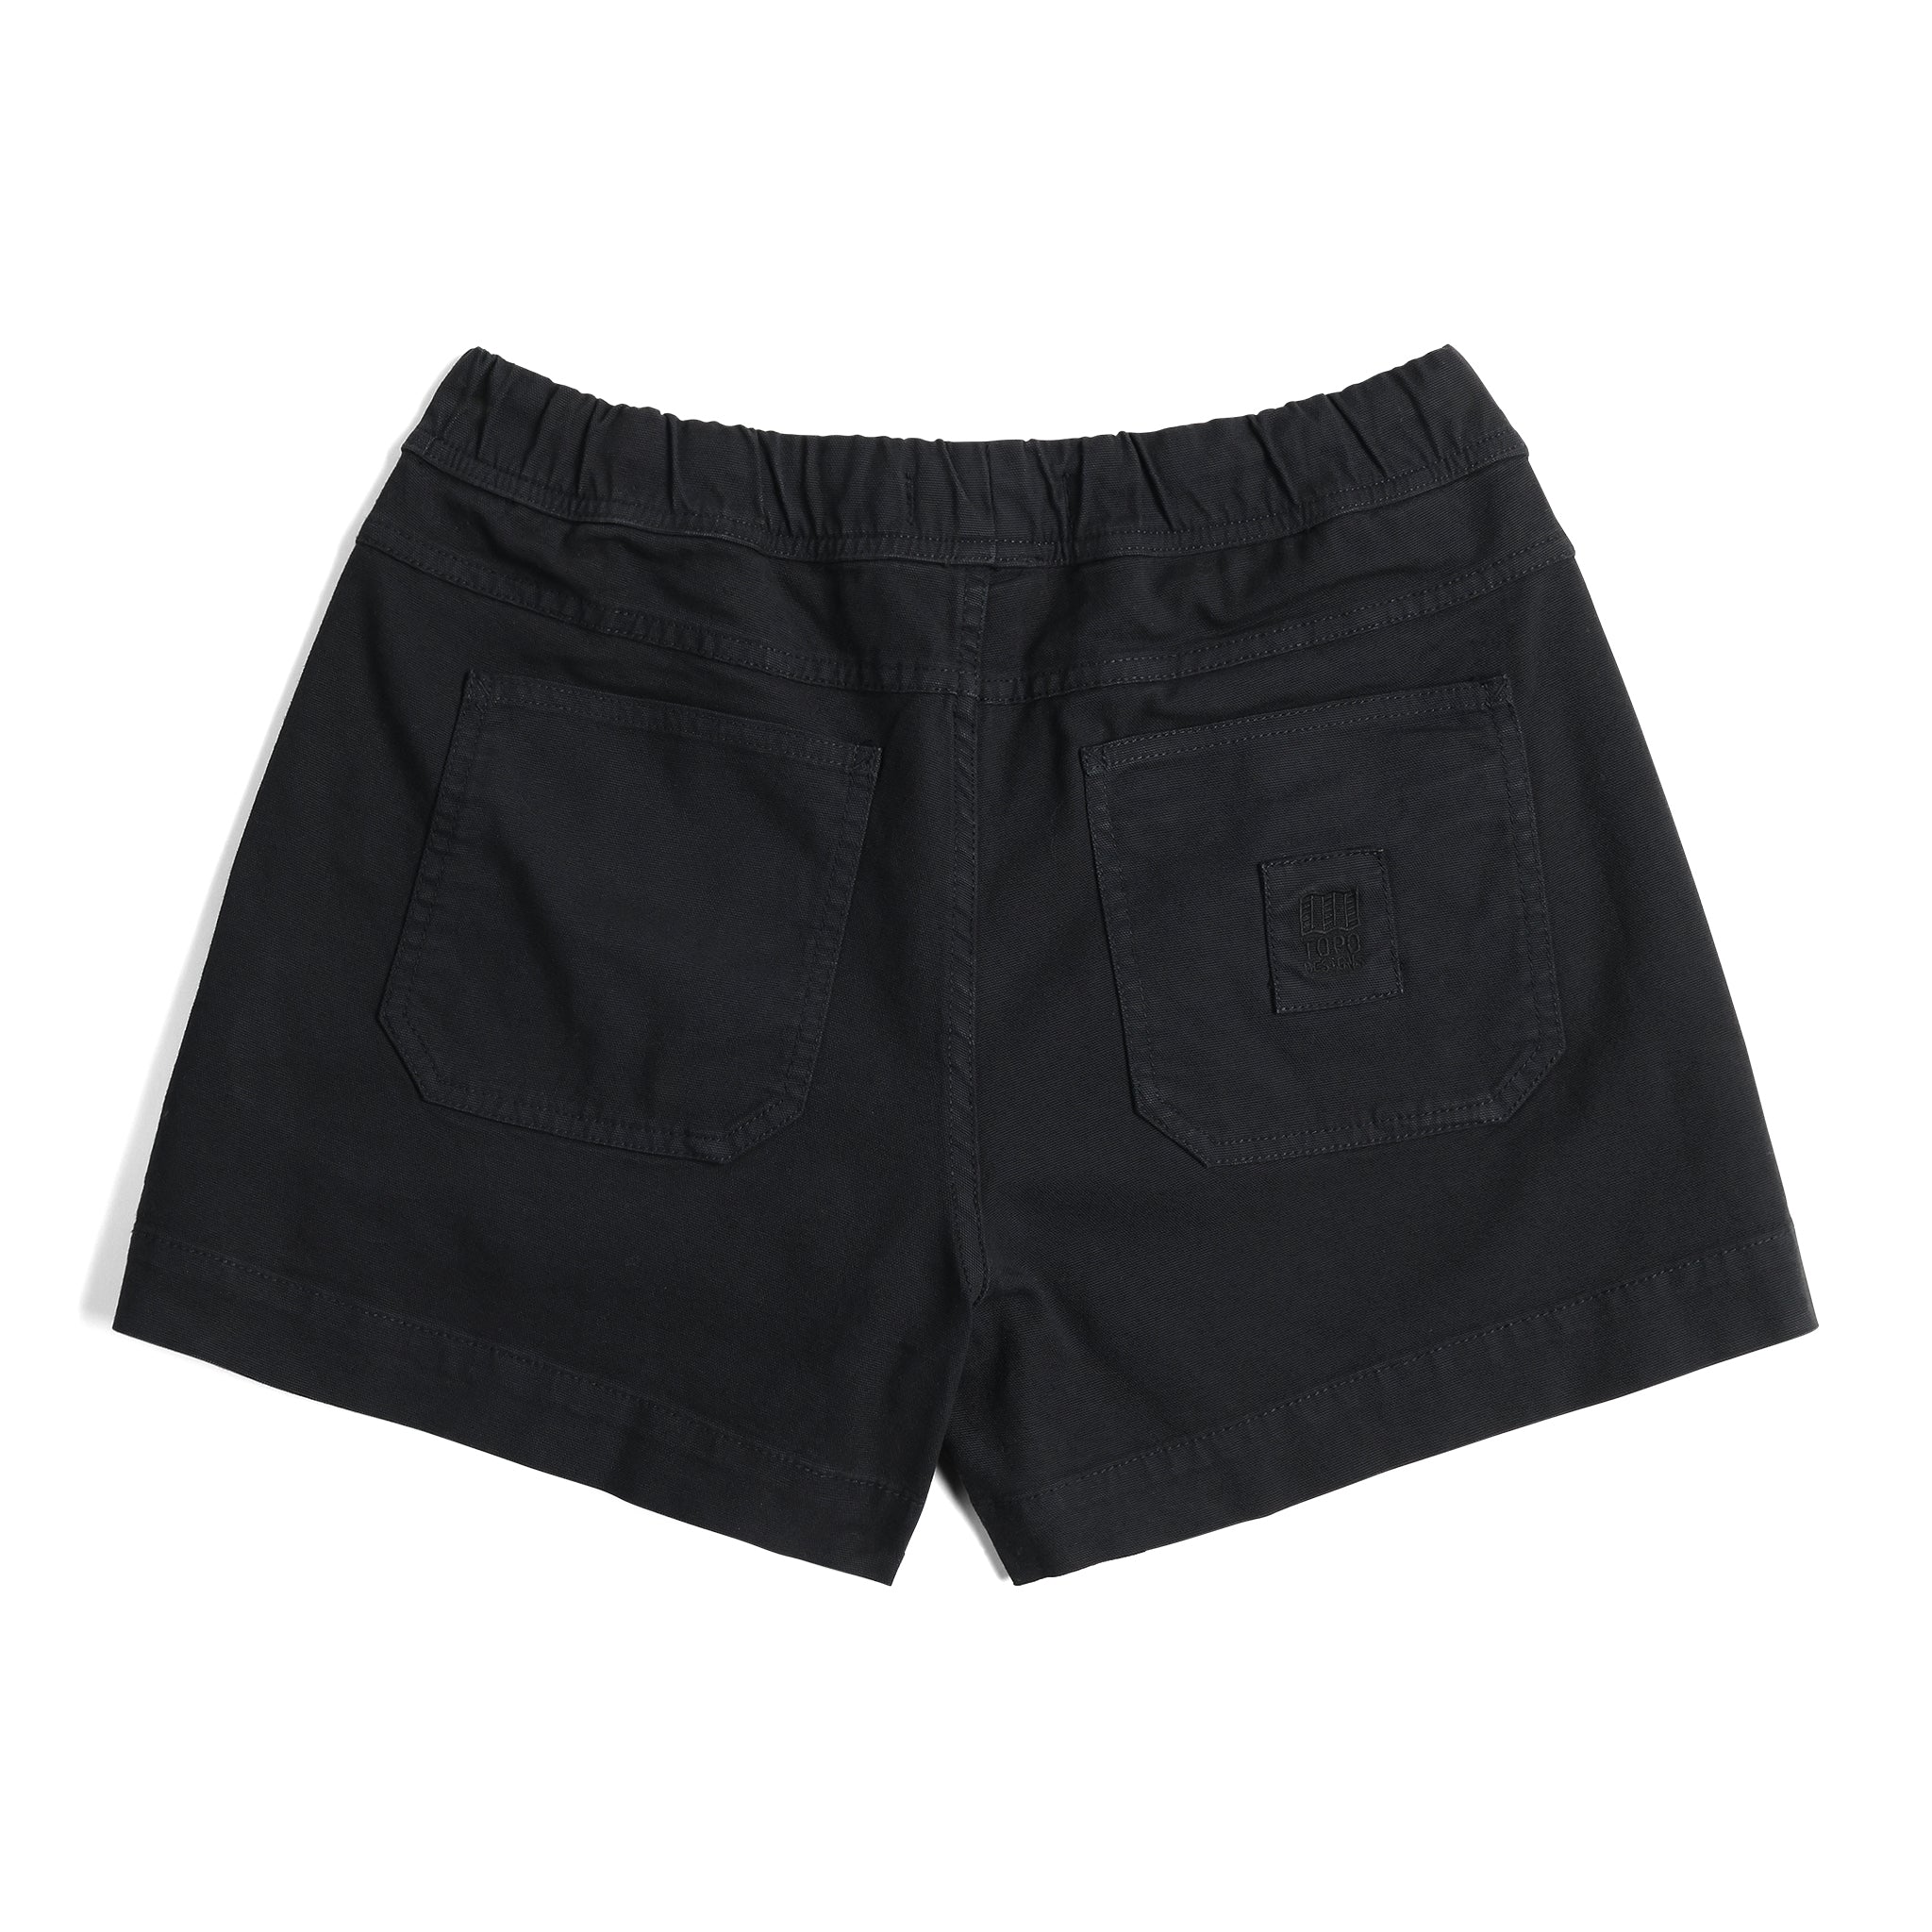 Back View of Topo Designs Dirt Shorts - Women's in "Black"